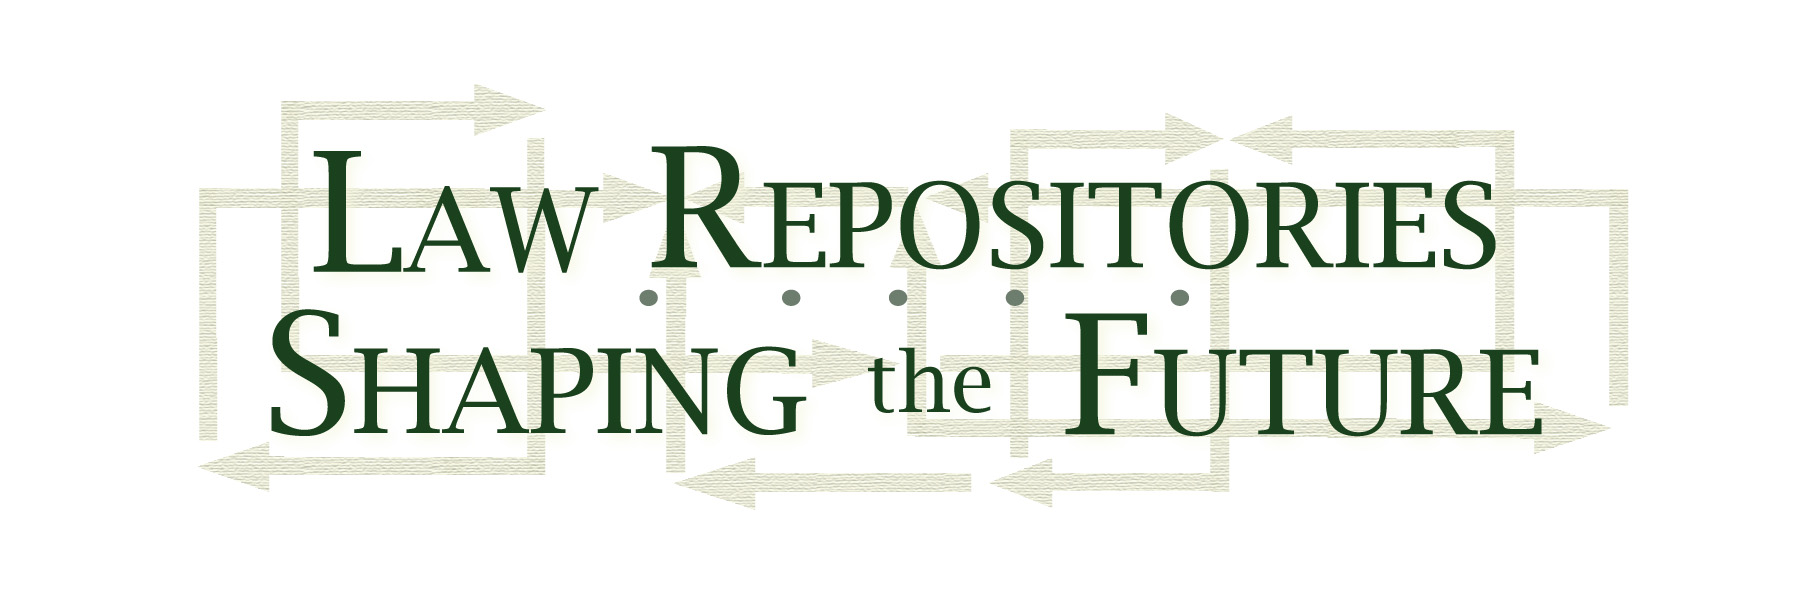 Law Repositories 2015: Shaping the Future